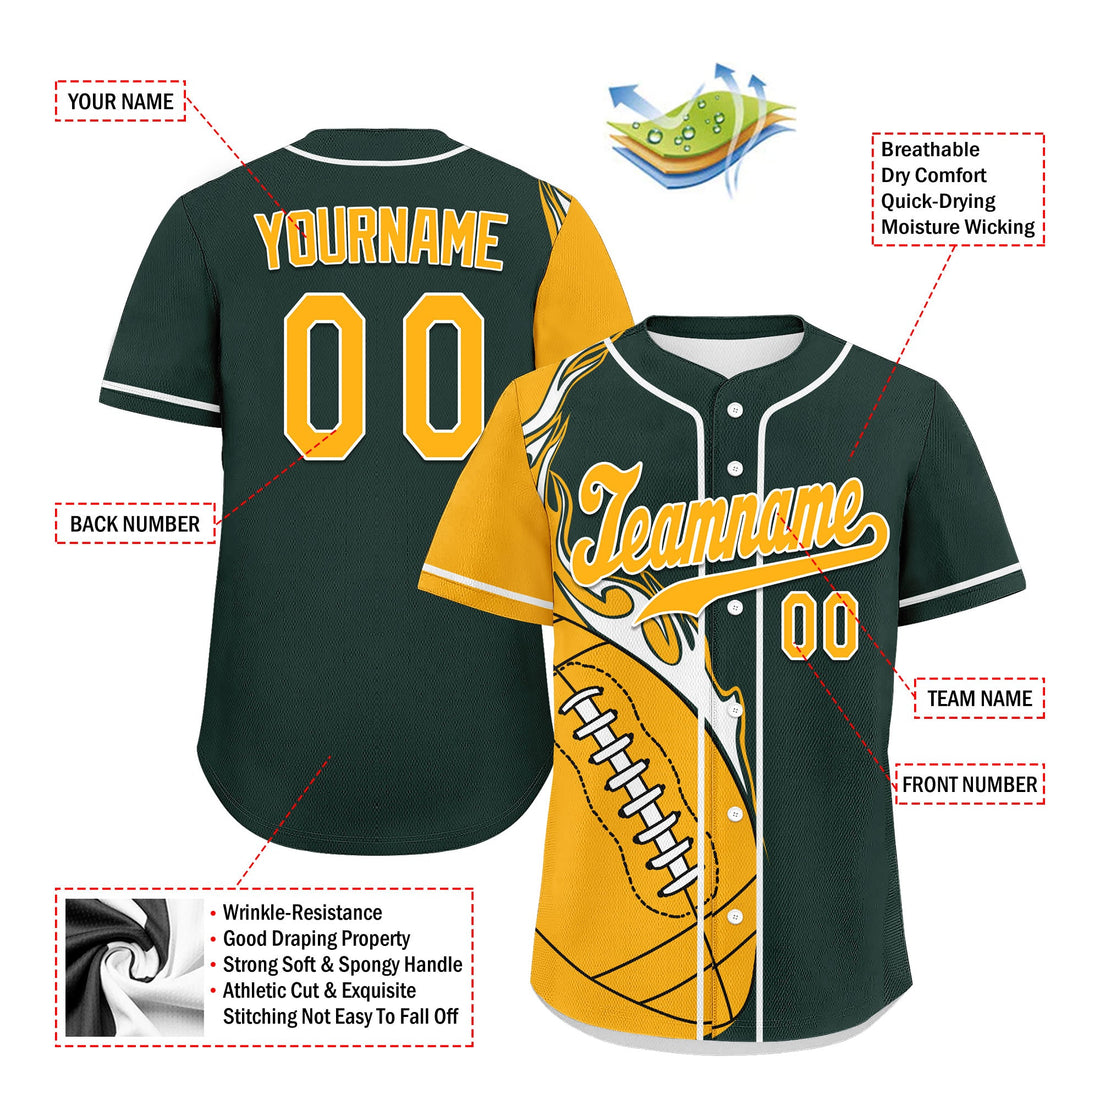 Custom Green Yellow Classic Style Personalized Authentic Baseball Jersey UN002-D0b0a00-ac